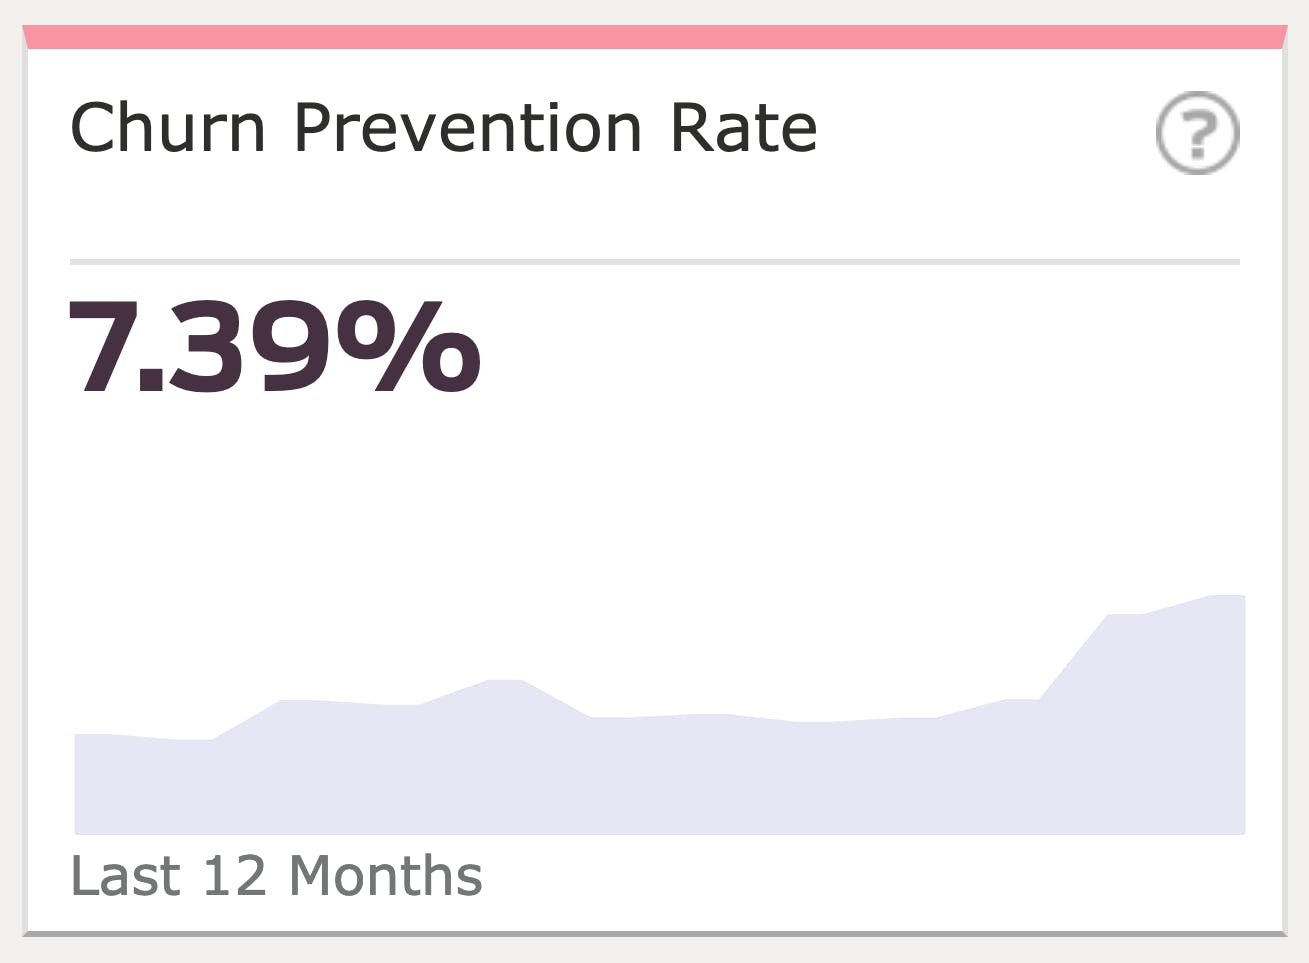 Diagram of Churn Prevention Rate at 7.39%